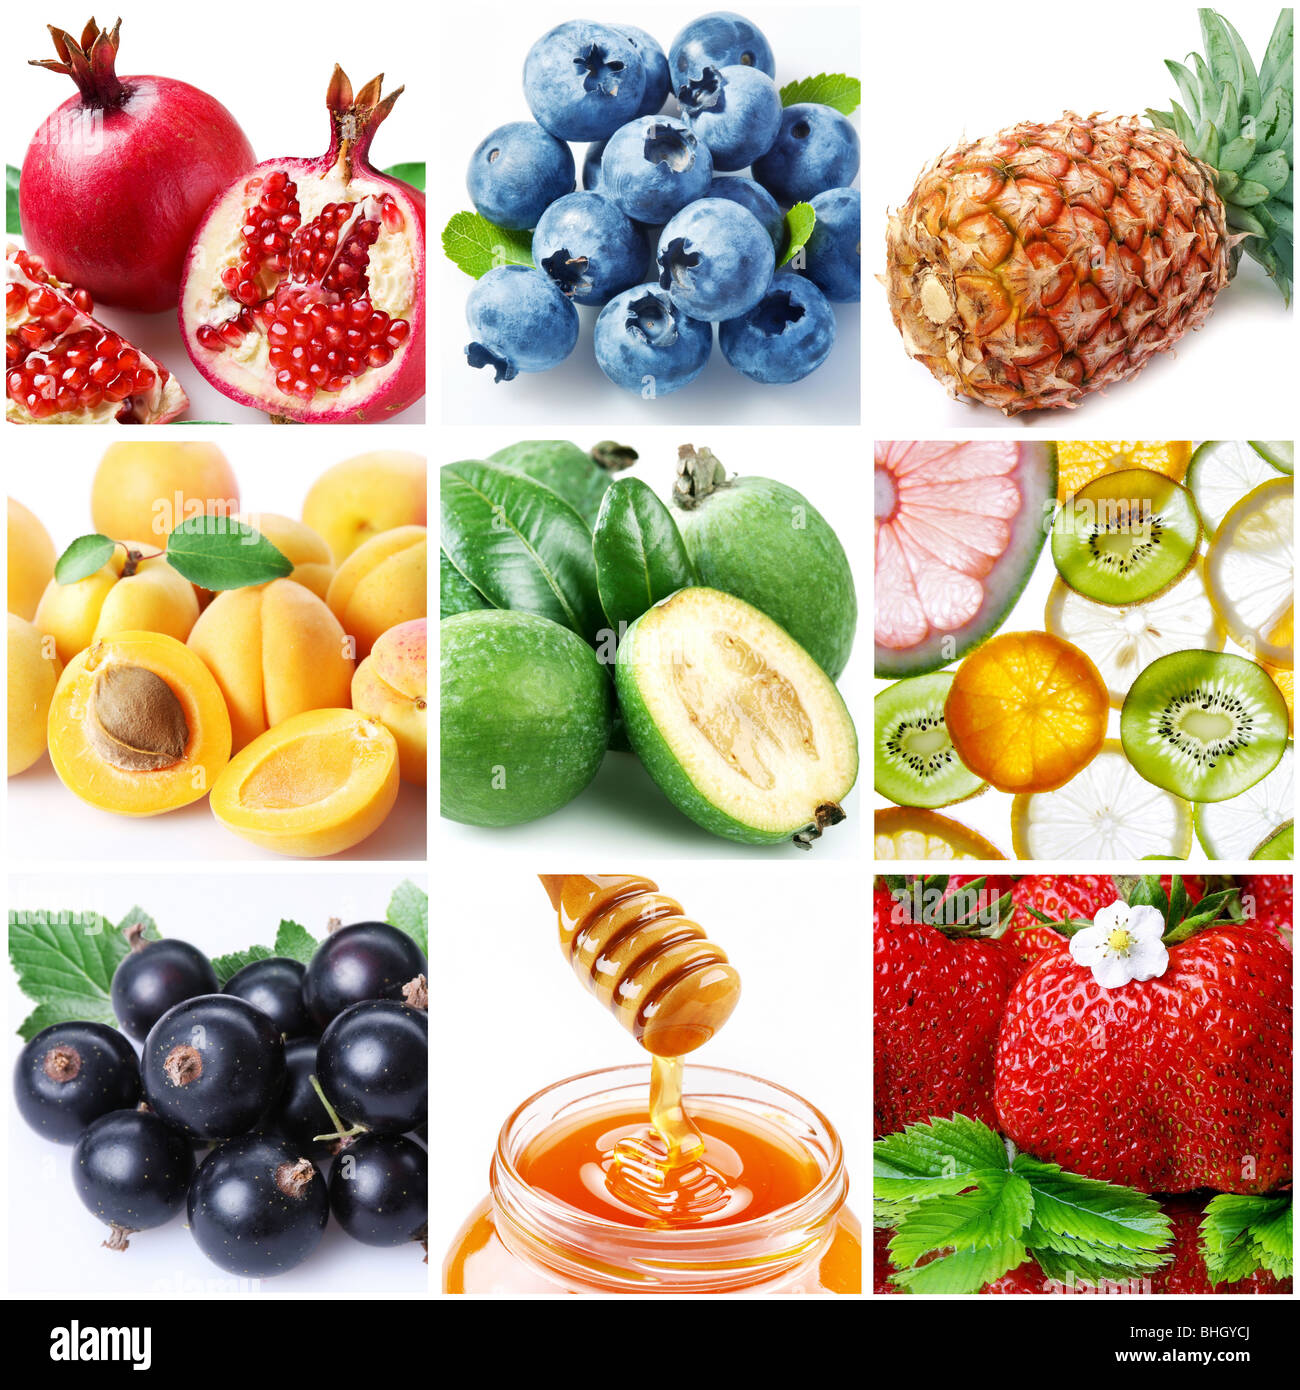 collection of images on the theme of 'fruits' Stock Photo